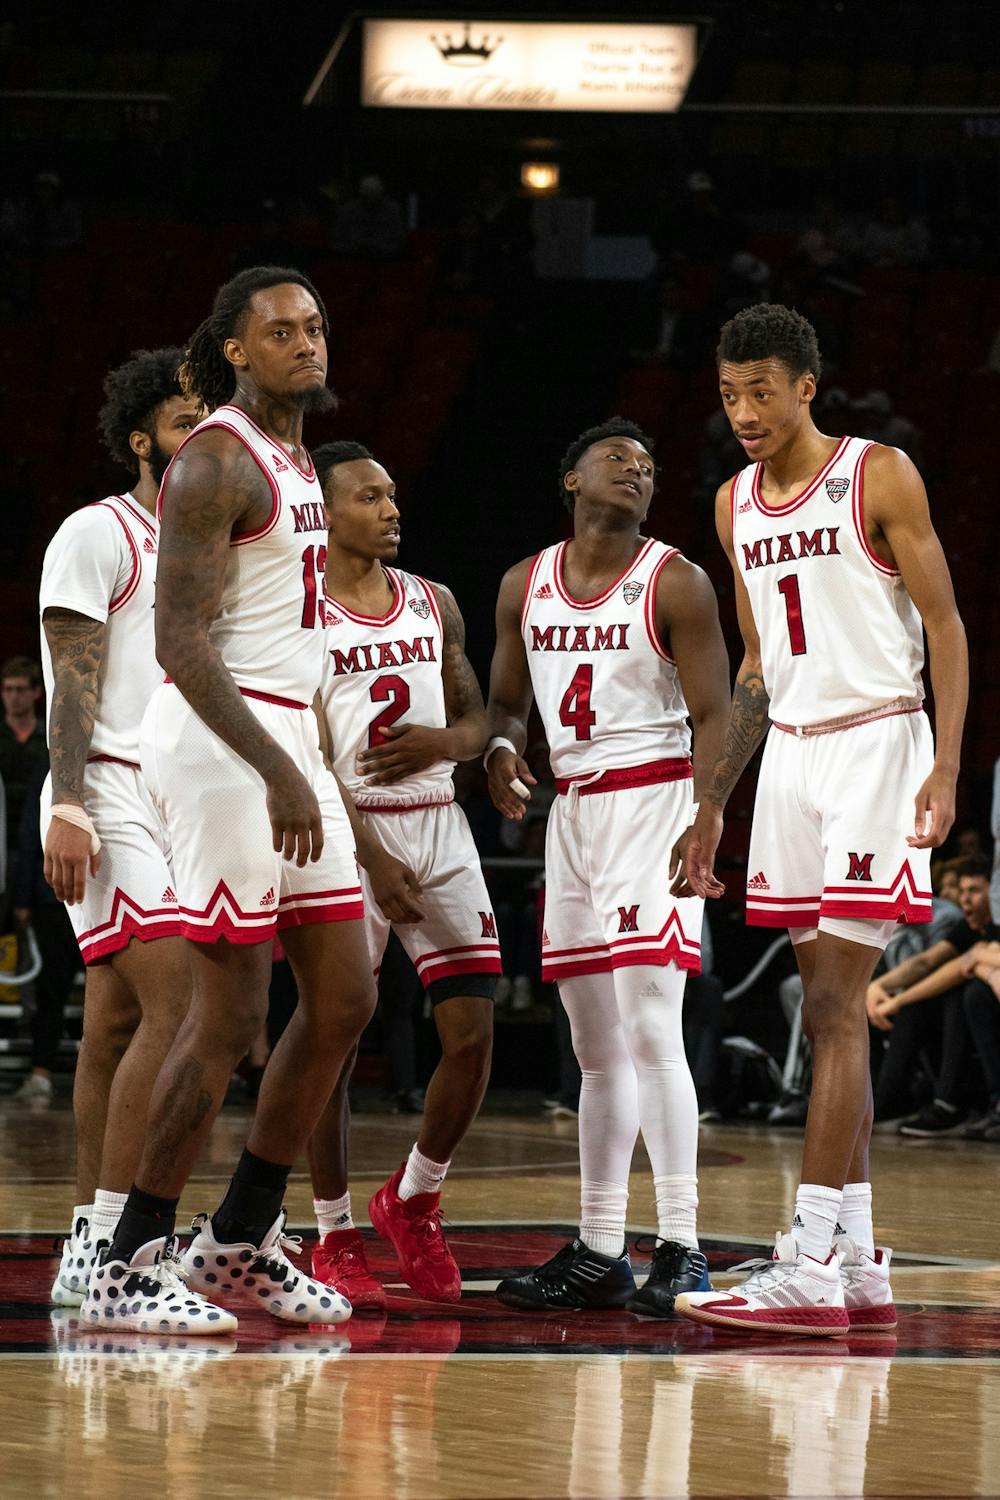 <p>The Miami men&#x27;s basketball team (from left to right: junior guard Dae Dae Grant, senior forward Dalonte Brown, senior guard Mekhi Lairy, redshirt senior guard Isaiah Coleman-Lands and sophomore forward Kamari Williams) talk at halfcourt during a March 4 matchup against Eastern Michigan.</p>